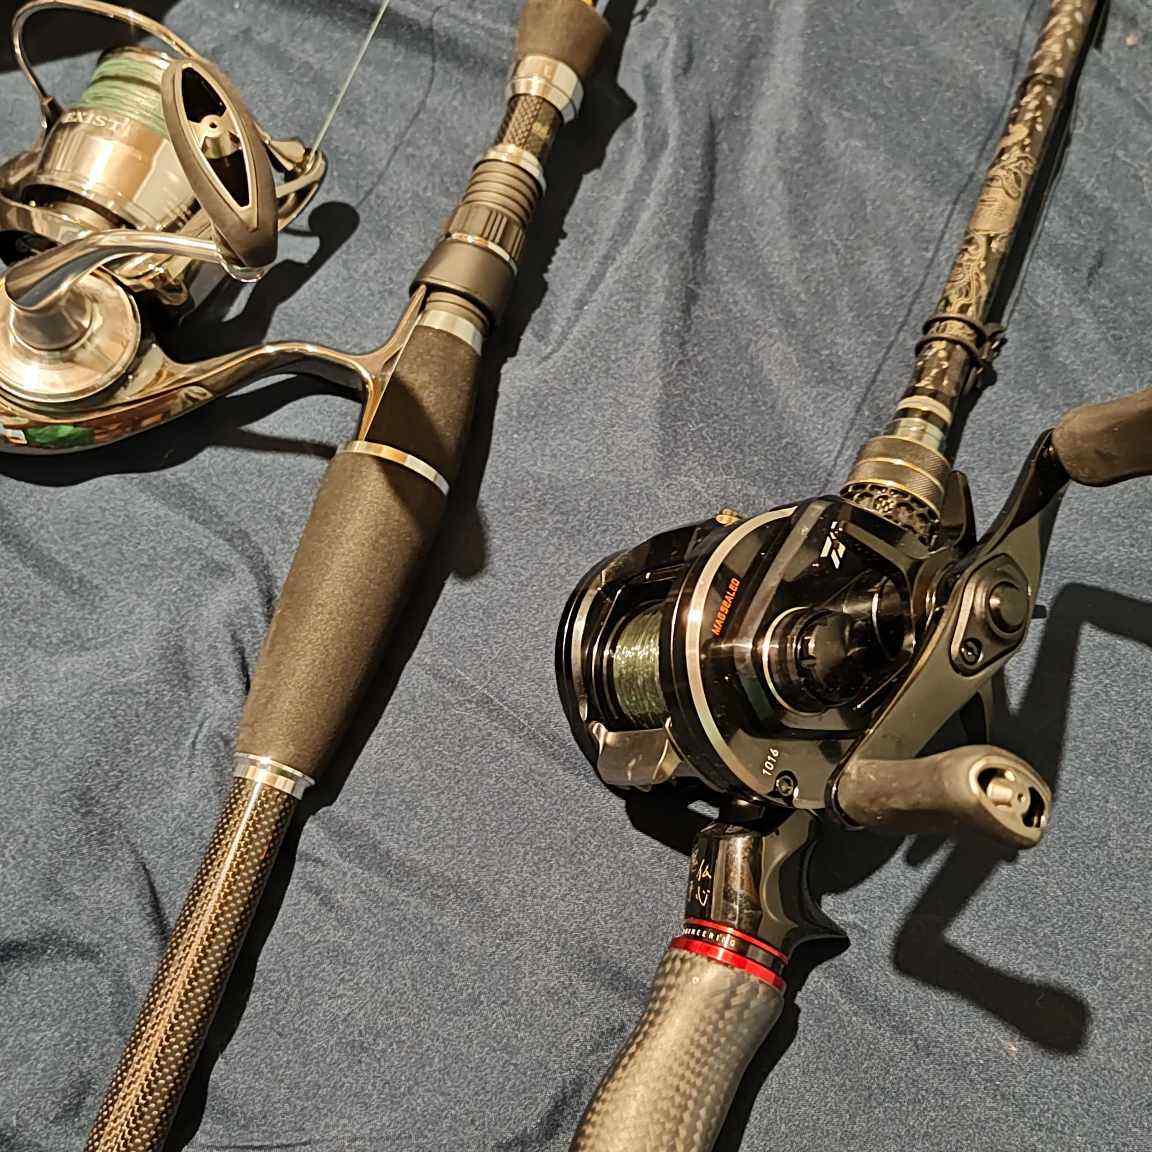 Higher End Gear Suggestions Fishing Rods, Reels, Line, And, 46% OFF